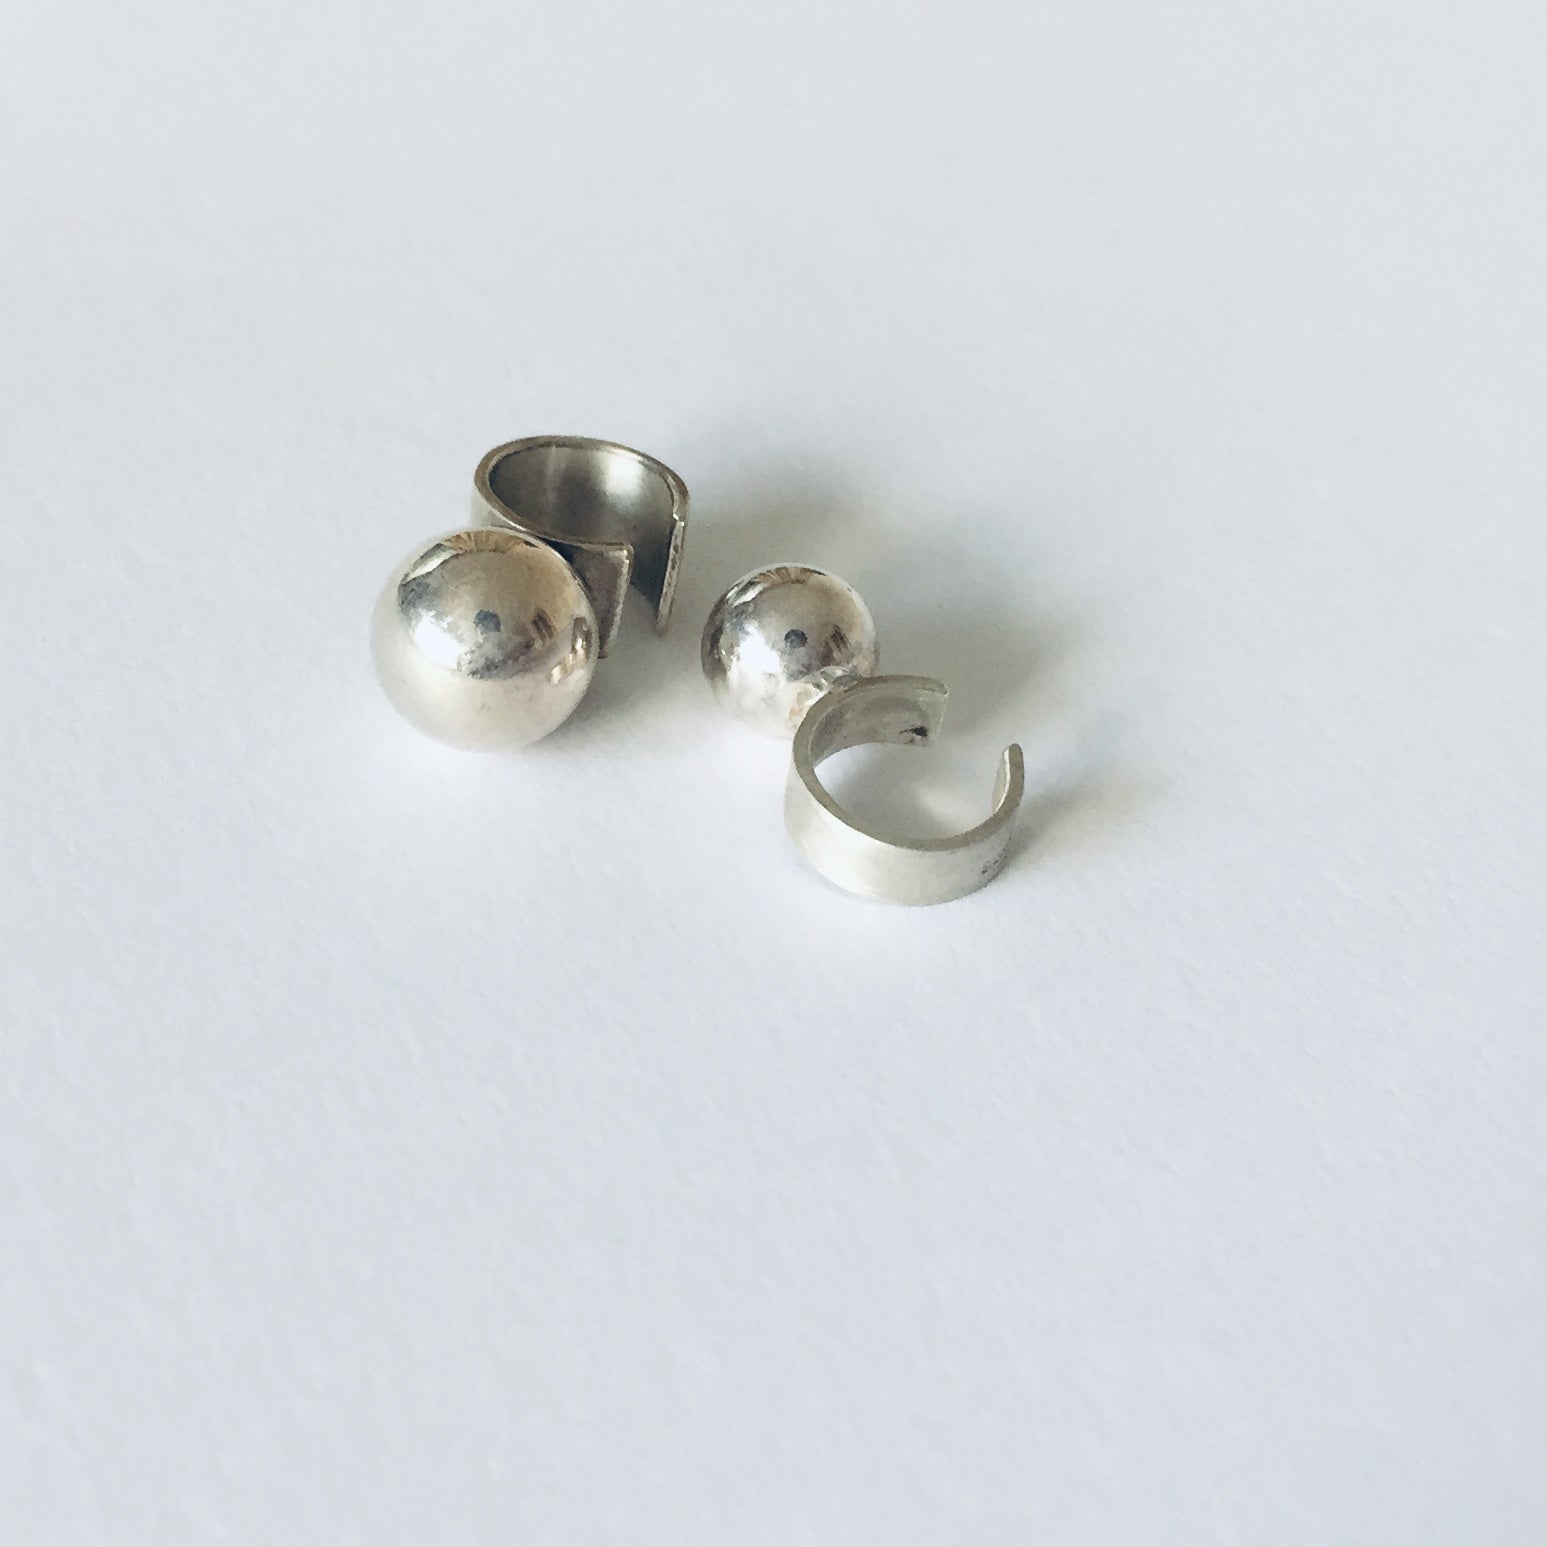 Adjustable Sterling Silver925 8.0 / 10.0 Ball on Matte Finish Sterling  Silver925 Ear Cuff For Men & Women シルバー ユニセックス ボール イヤカフ